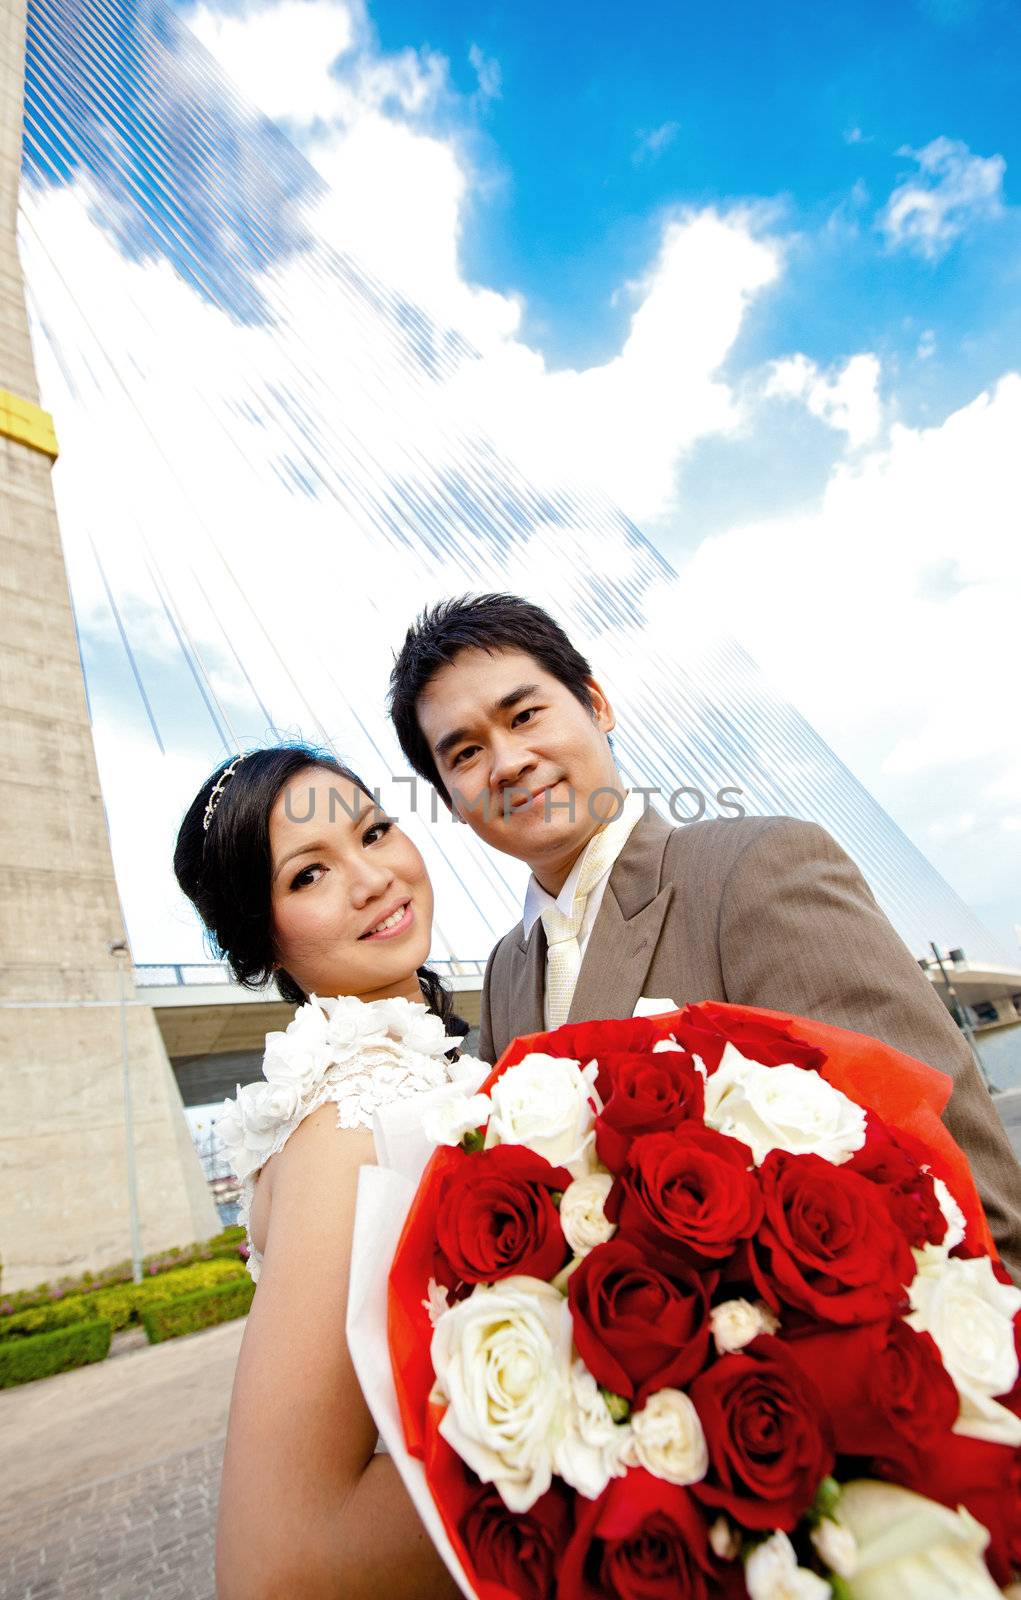 couples of happiness and romantic Bride and groom with beautiful rose bouquet